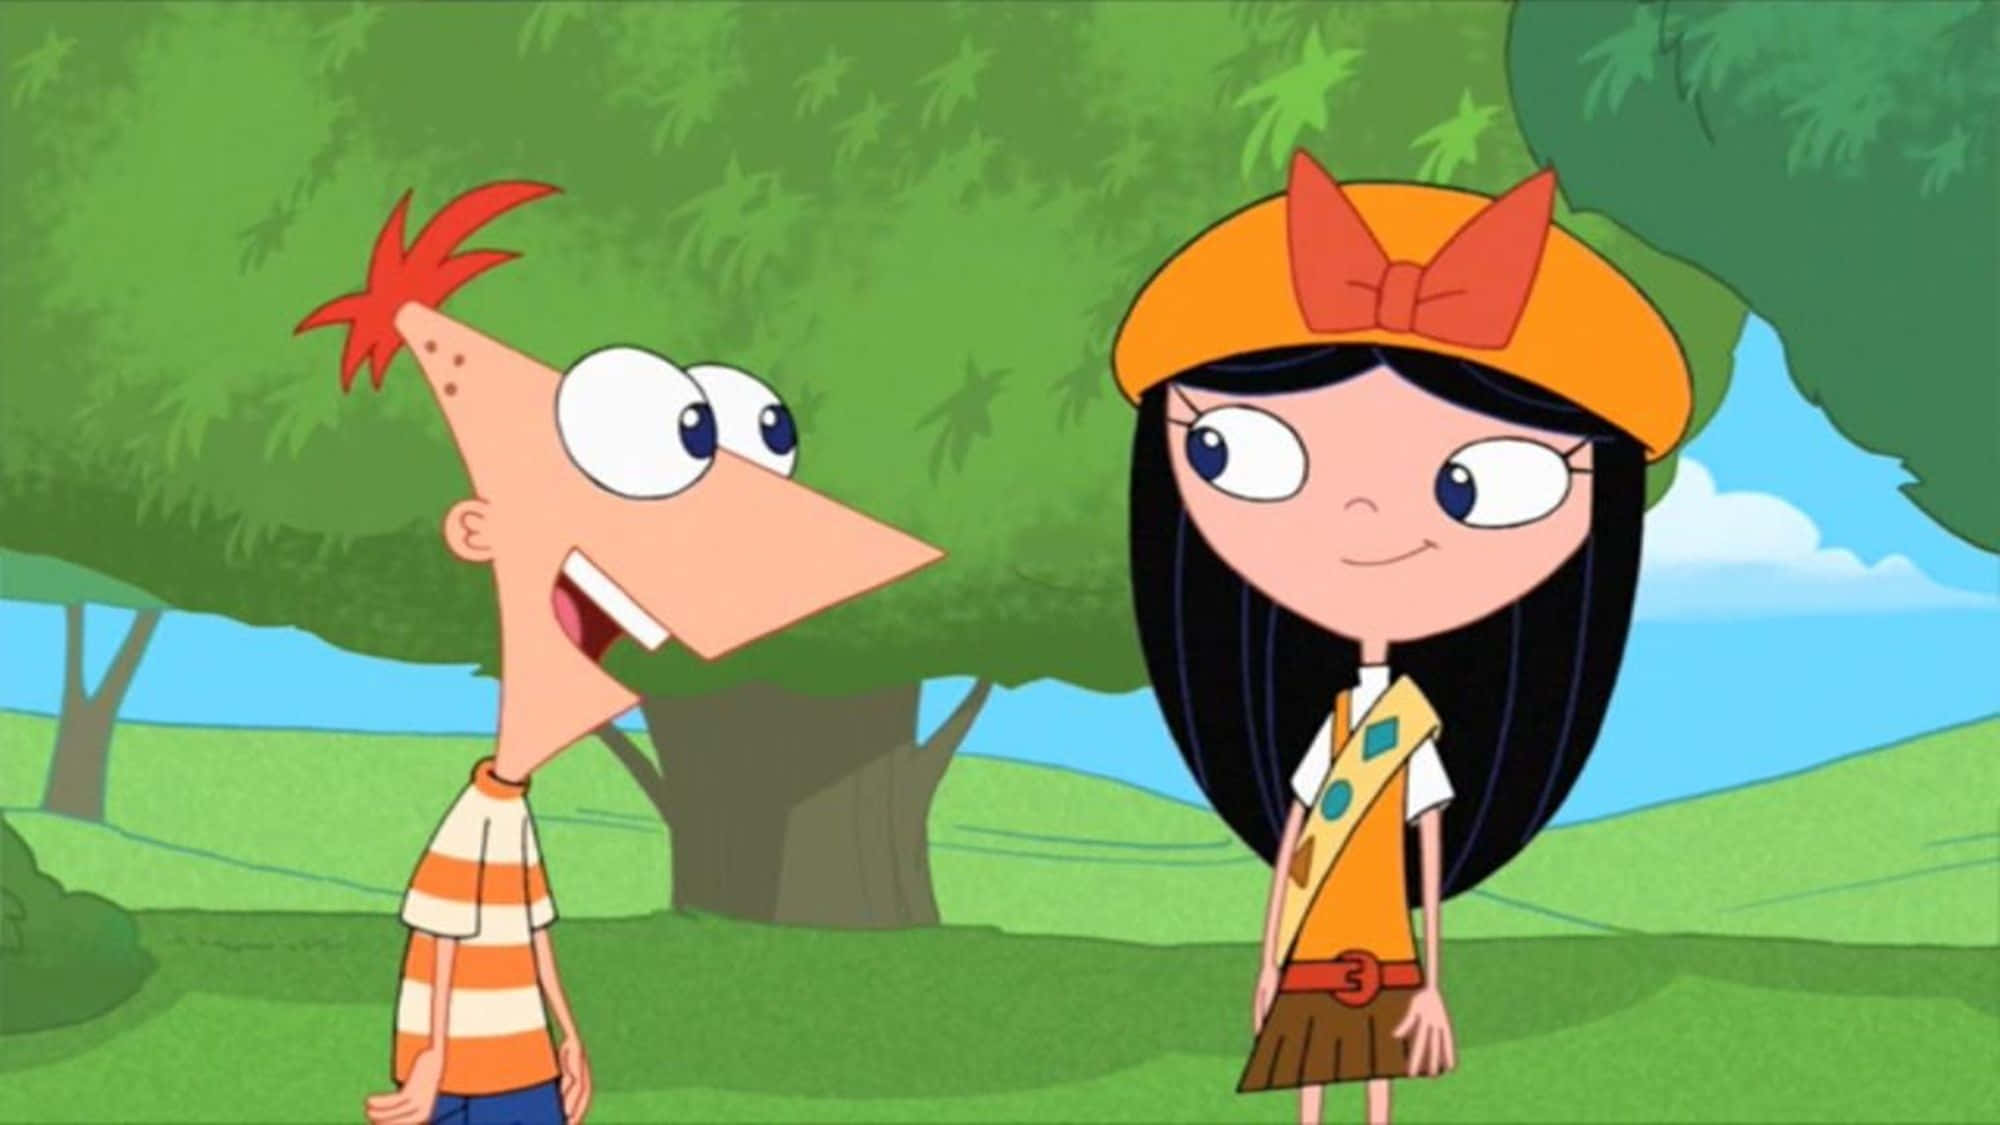 Phineas and Ferb enjoying a fun-filled adventure outdoors